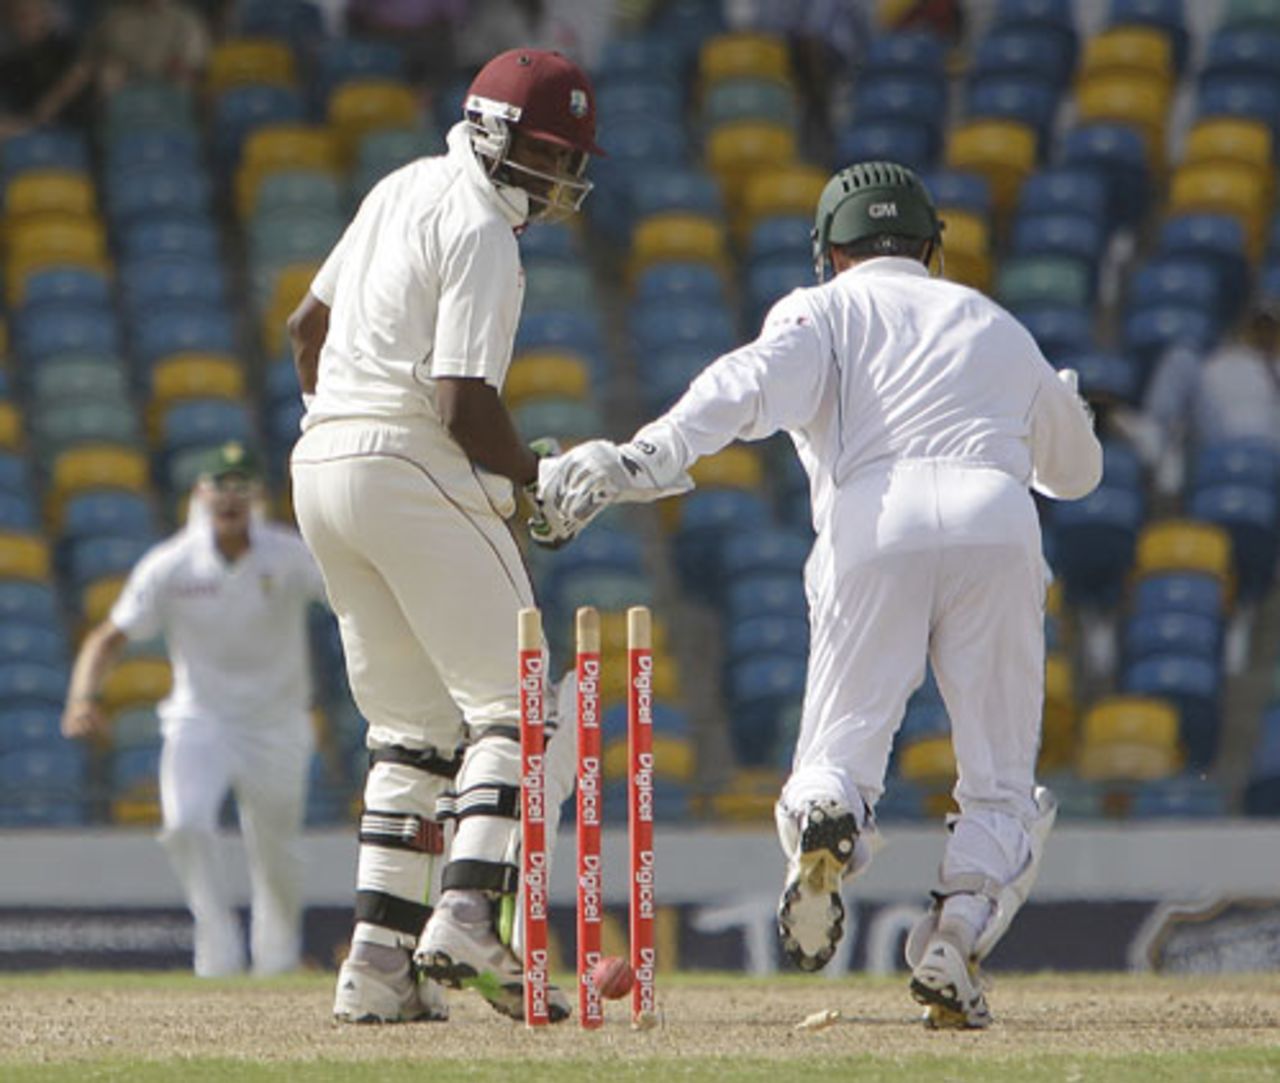 Dwayne Bravo is bowled by Paul Harris, West Indies v South Africa, 3rd Test, Barbados, 3rd day, June 28, 2010 